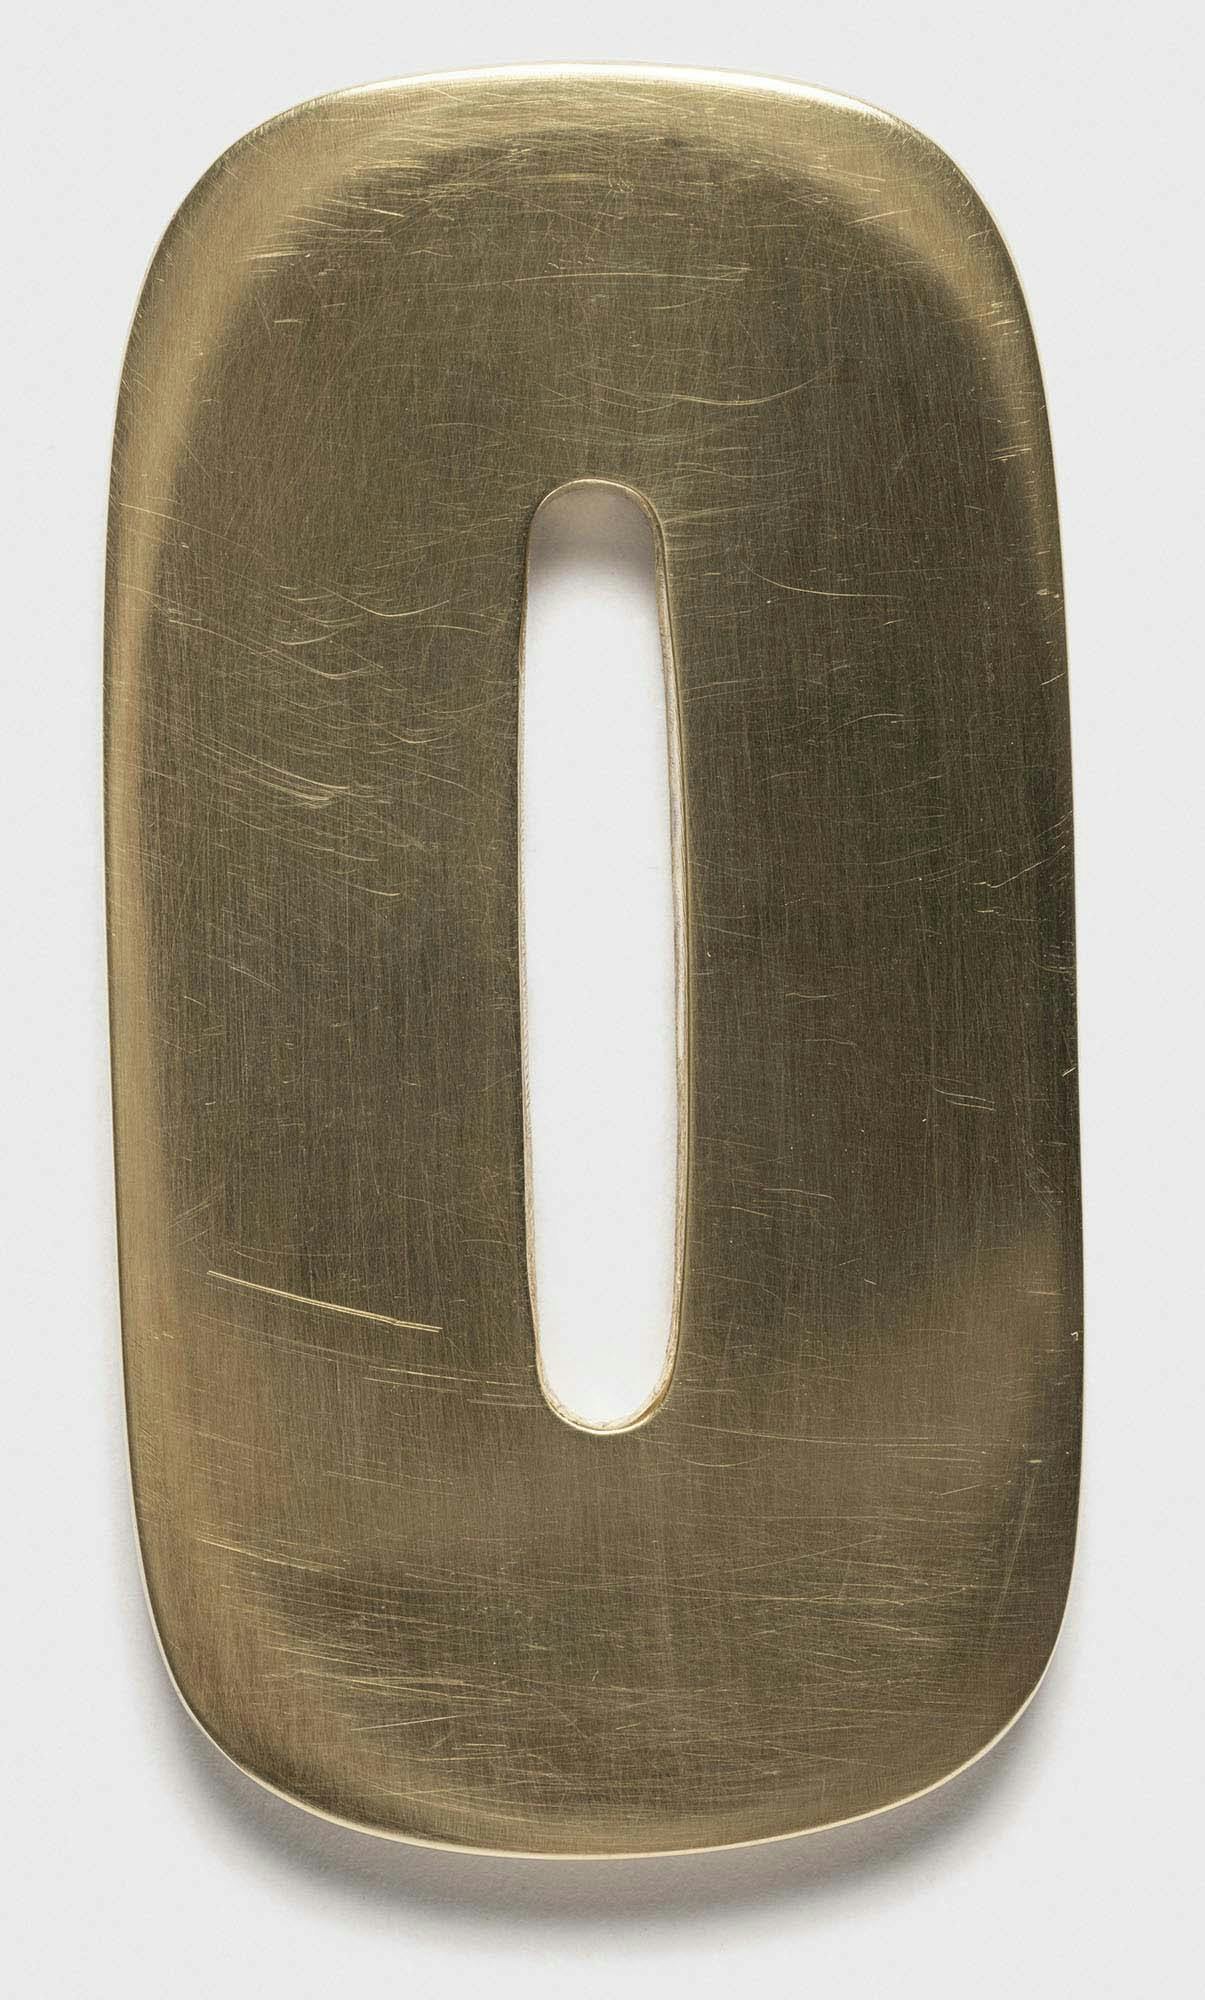 Brass #21
1939
Hand carved brass
H. 3 5/8 in. (9.2 cm)
 – The Richard Pousette-Dart Foundation